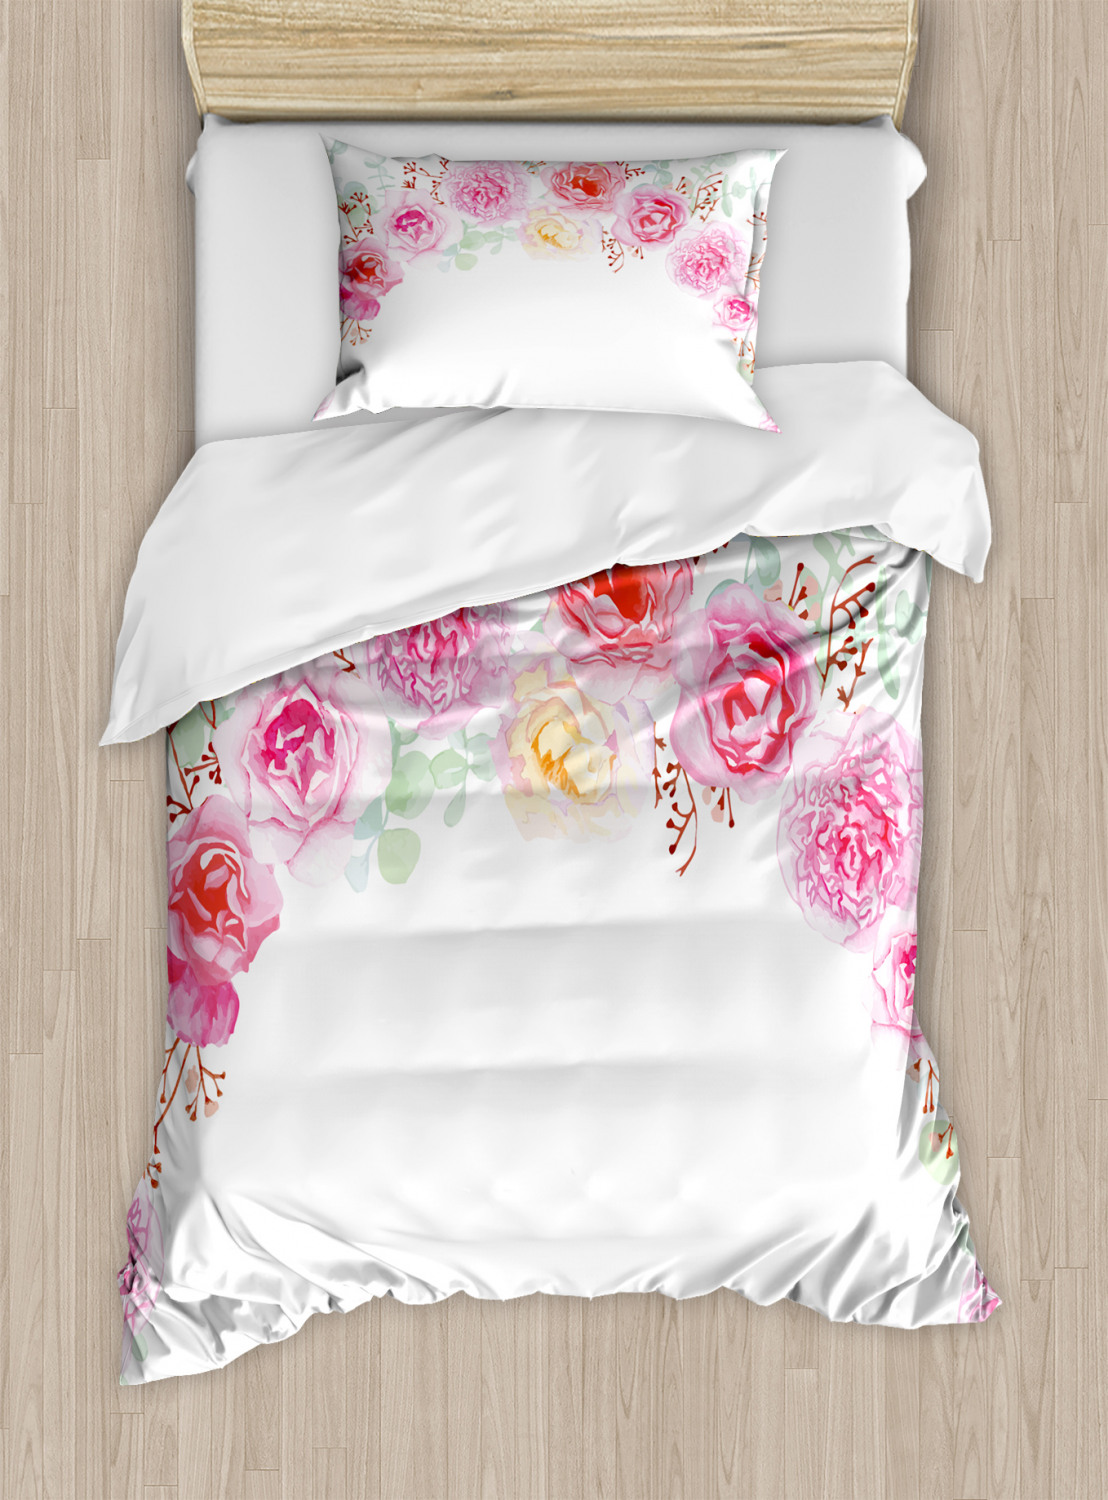 Shabby Chic Duvet Cover Set Twin Queen King Sizes with Pillow Shams ...